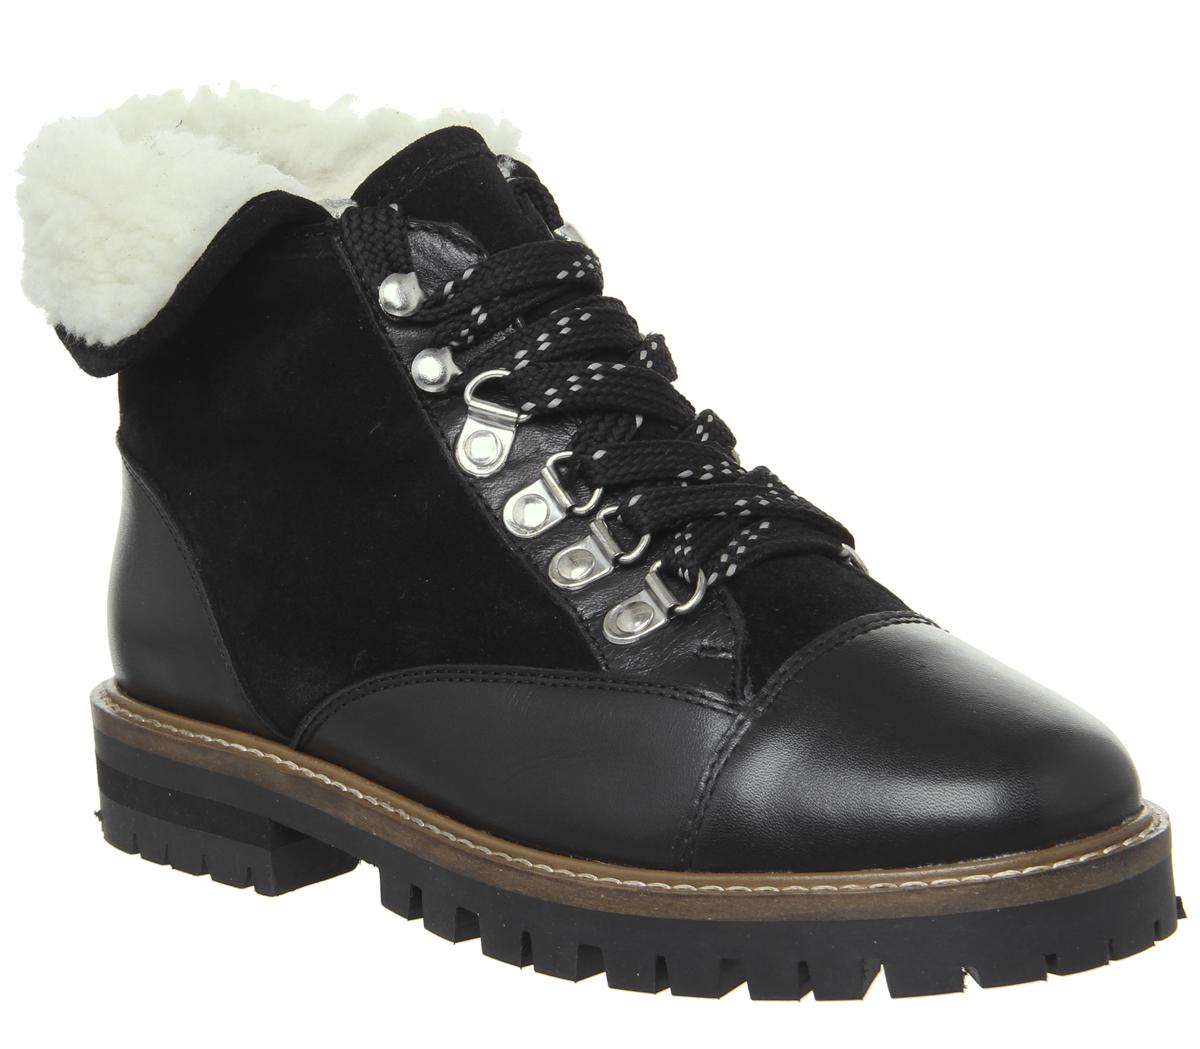 OFFICE Adams Furline Hiker Boots Black Suede Leather - Womens Boots